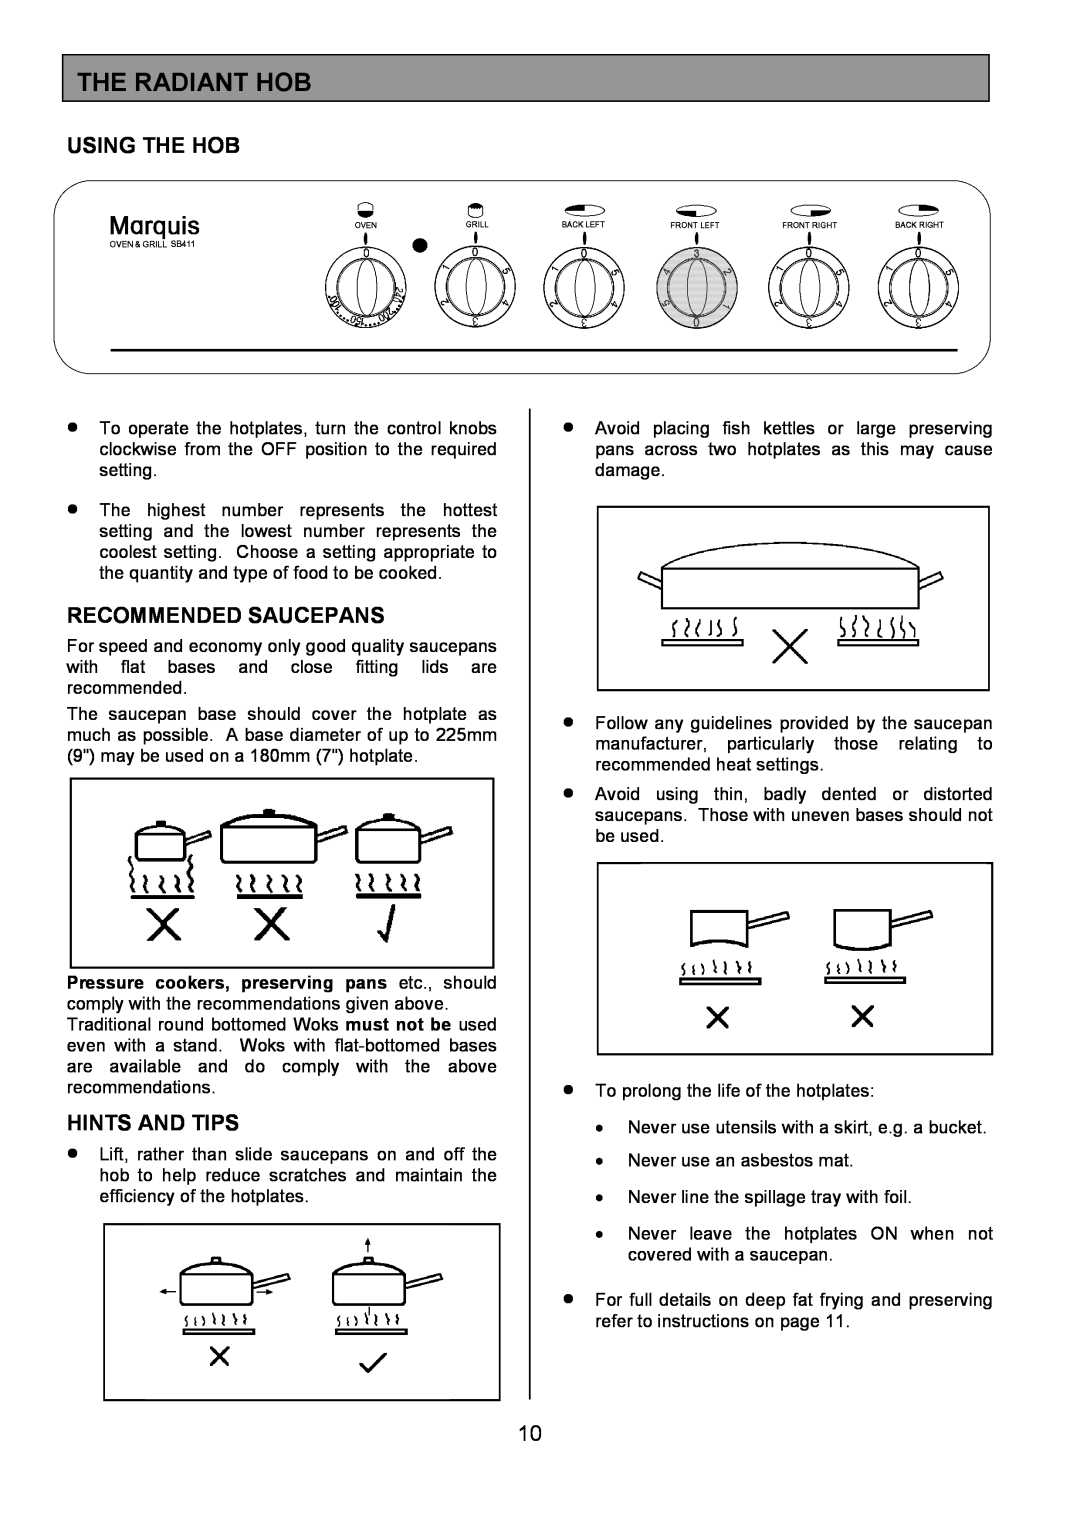 Tricity Bendix SB411 installation instructions The Radiant Hob, Using The Hob, Recommended Saucepans, Hints And Tips 